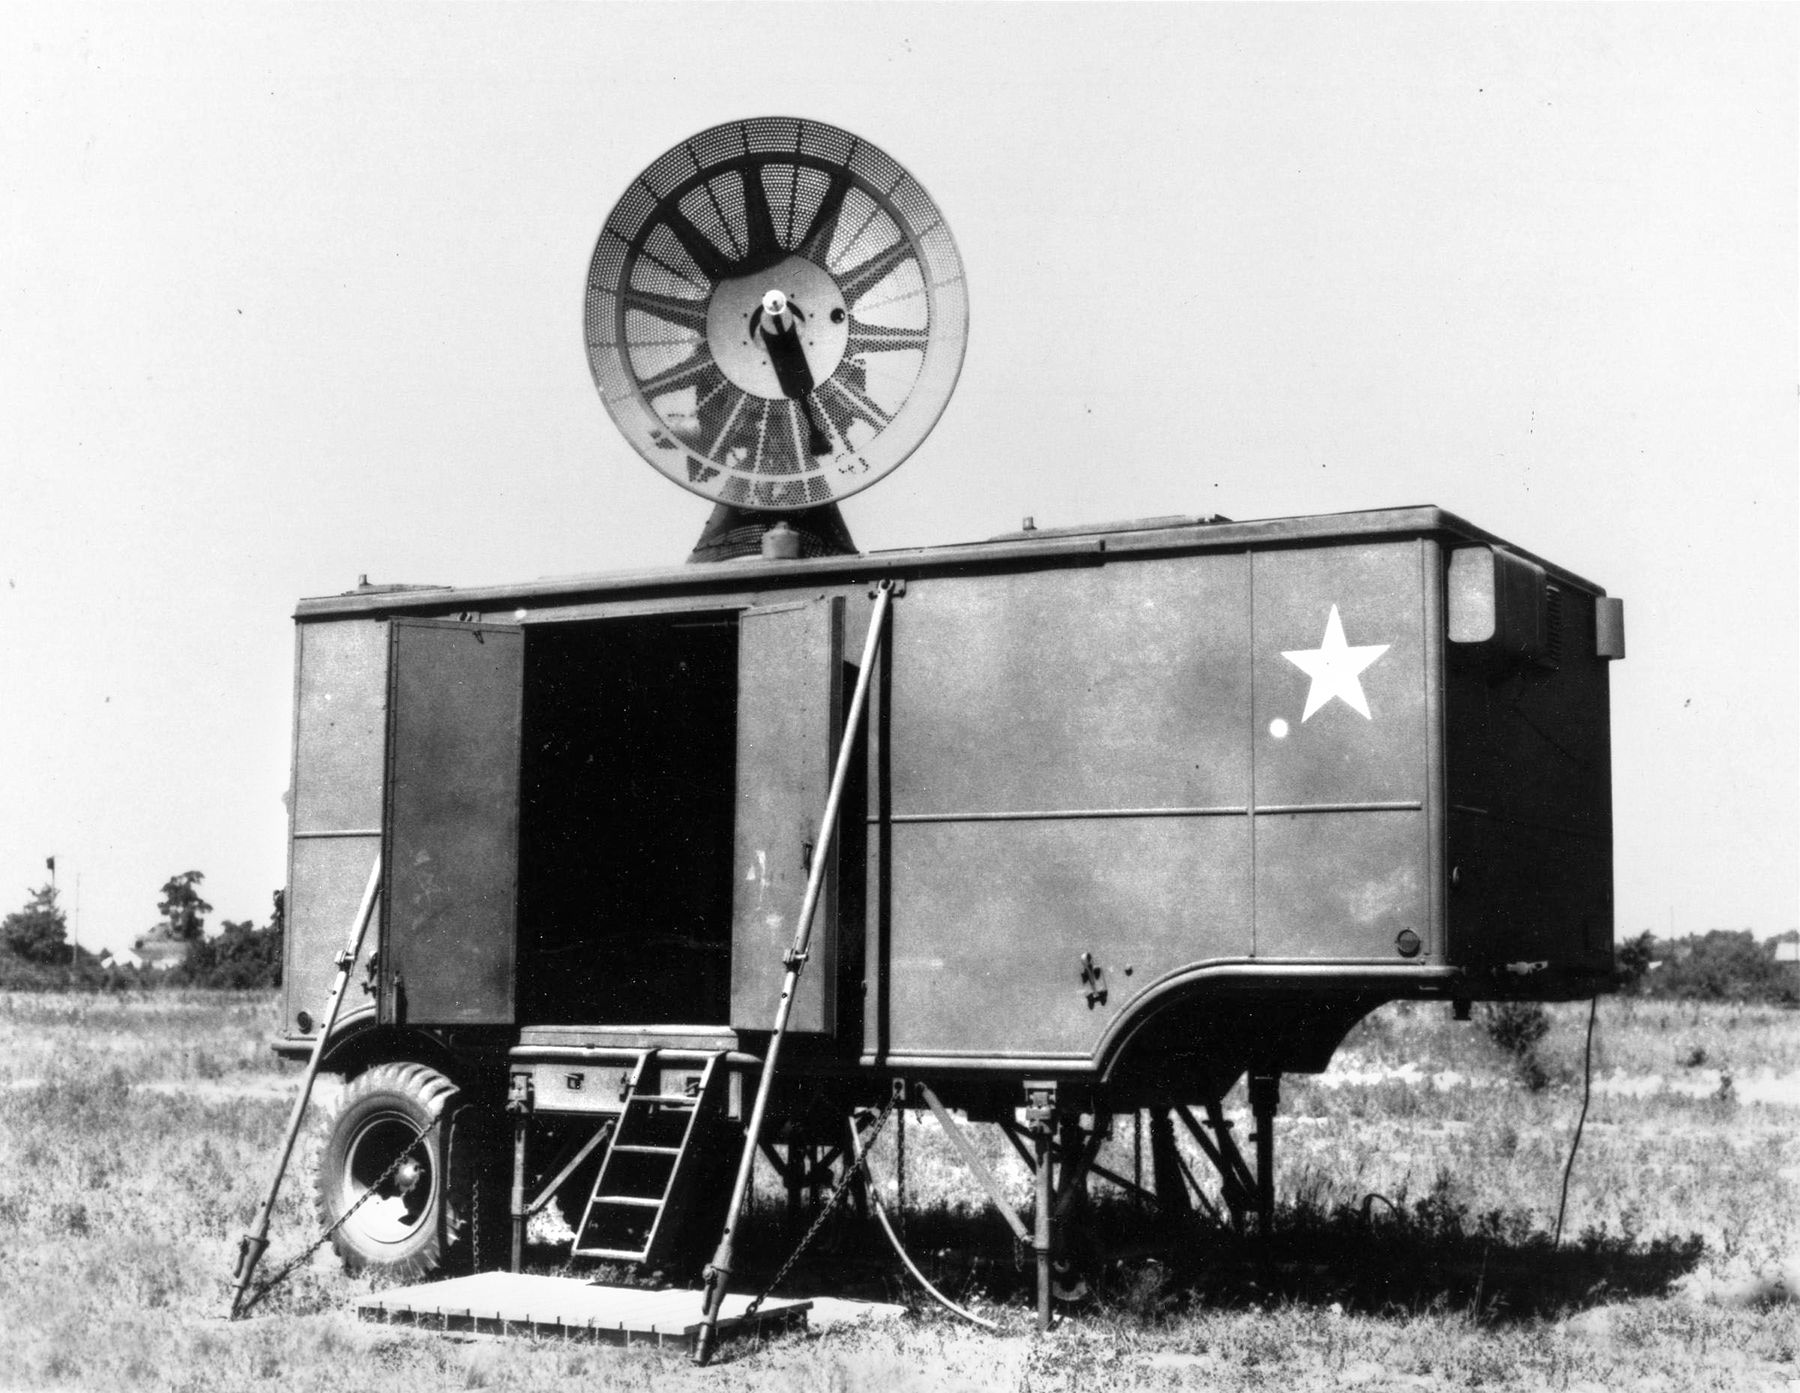 This SCR-584 Mobile Short Range Auto Tracking Radar Set was manufactured by Westinghouse, General Electric, and Chrysler during World War II.The MIT Radiation Laboratory originally developed the SCR-584 for use as a gun tracking radar using the 2J32 magnetron tube as a power source.